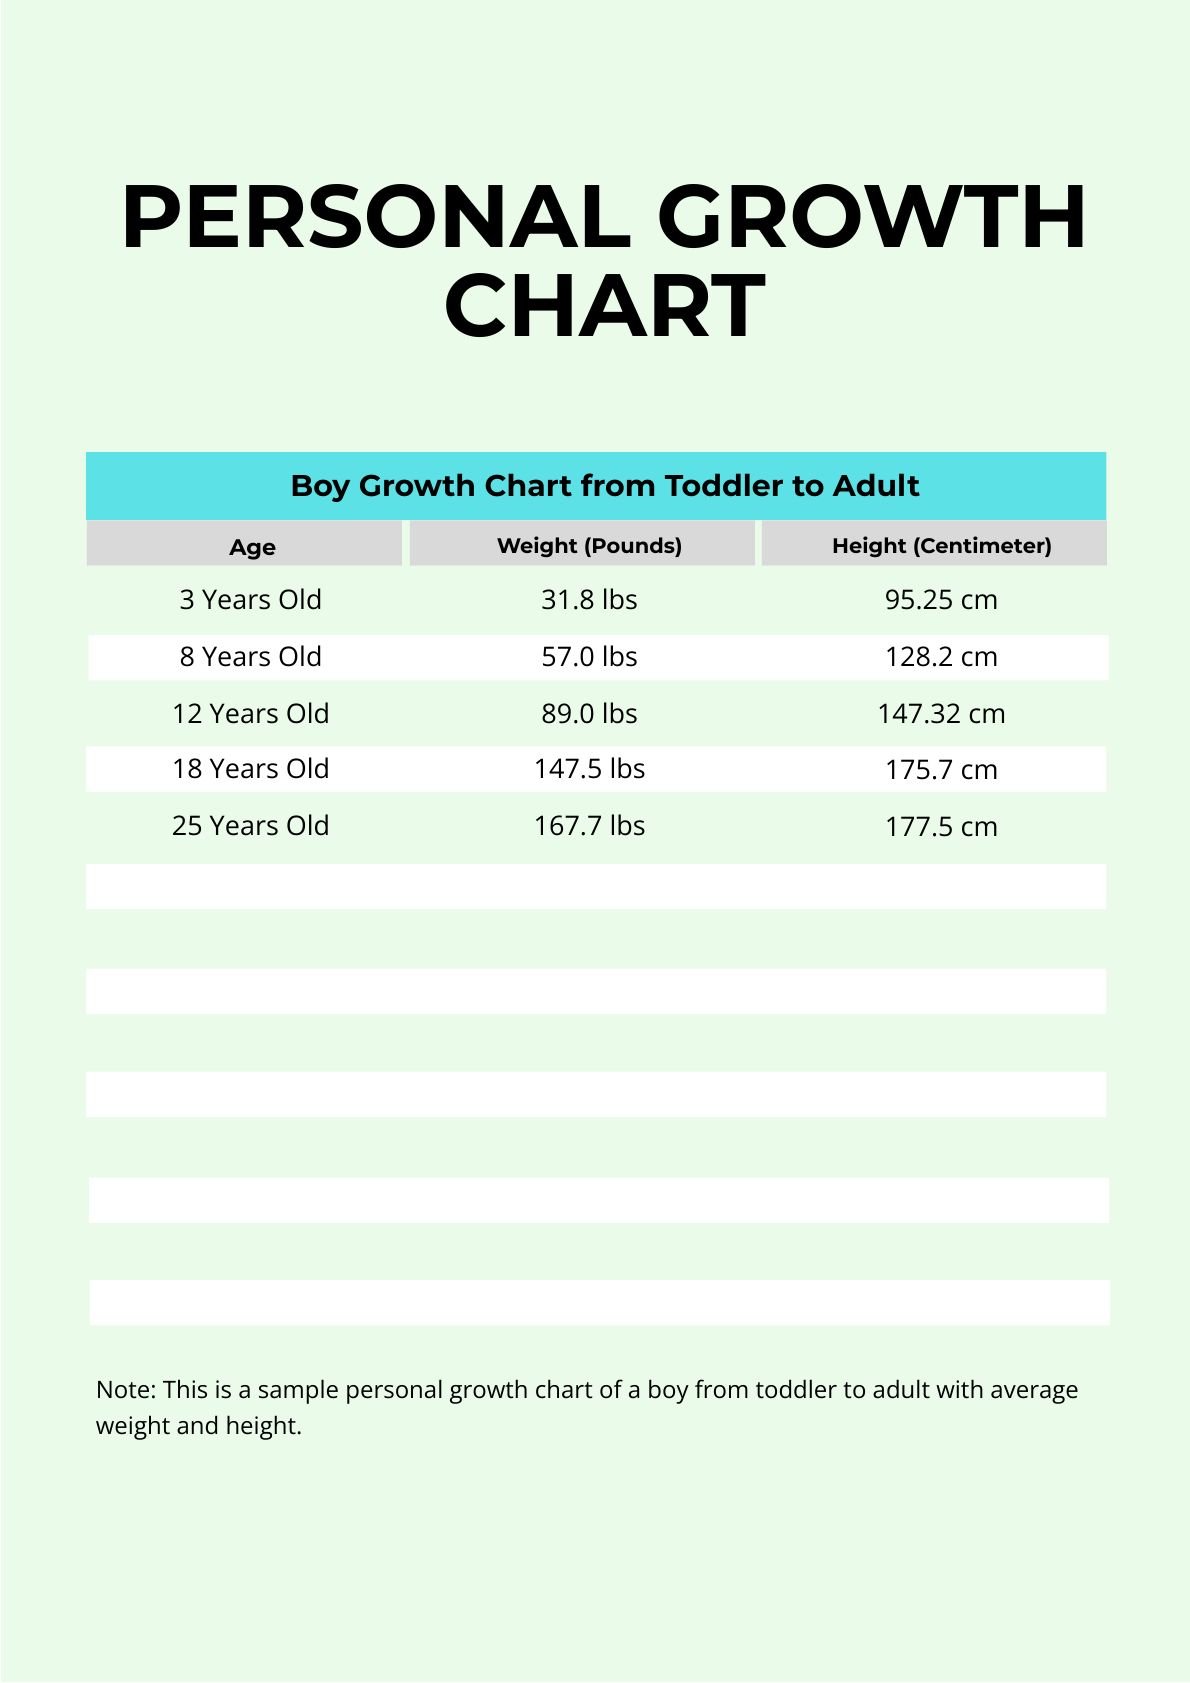 Free Personal Growth Chart in PDF, Illustrator